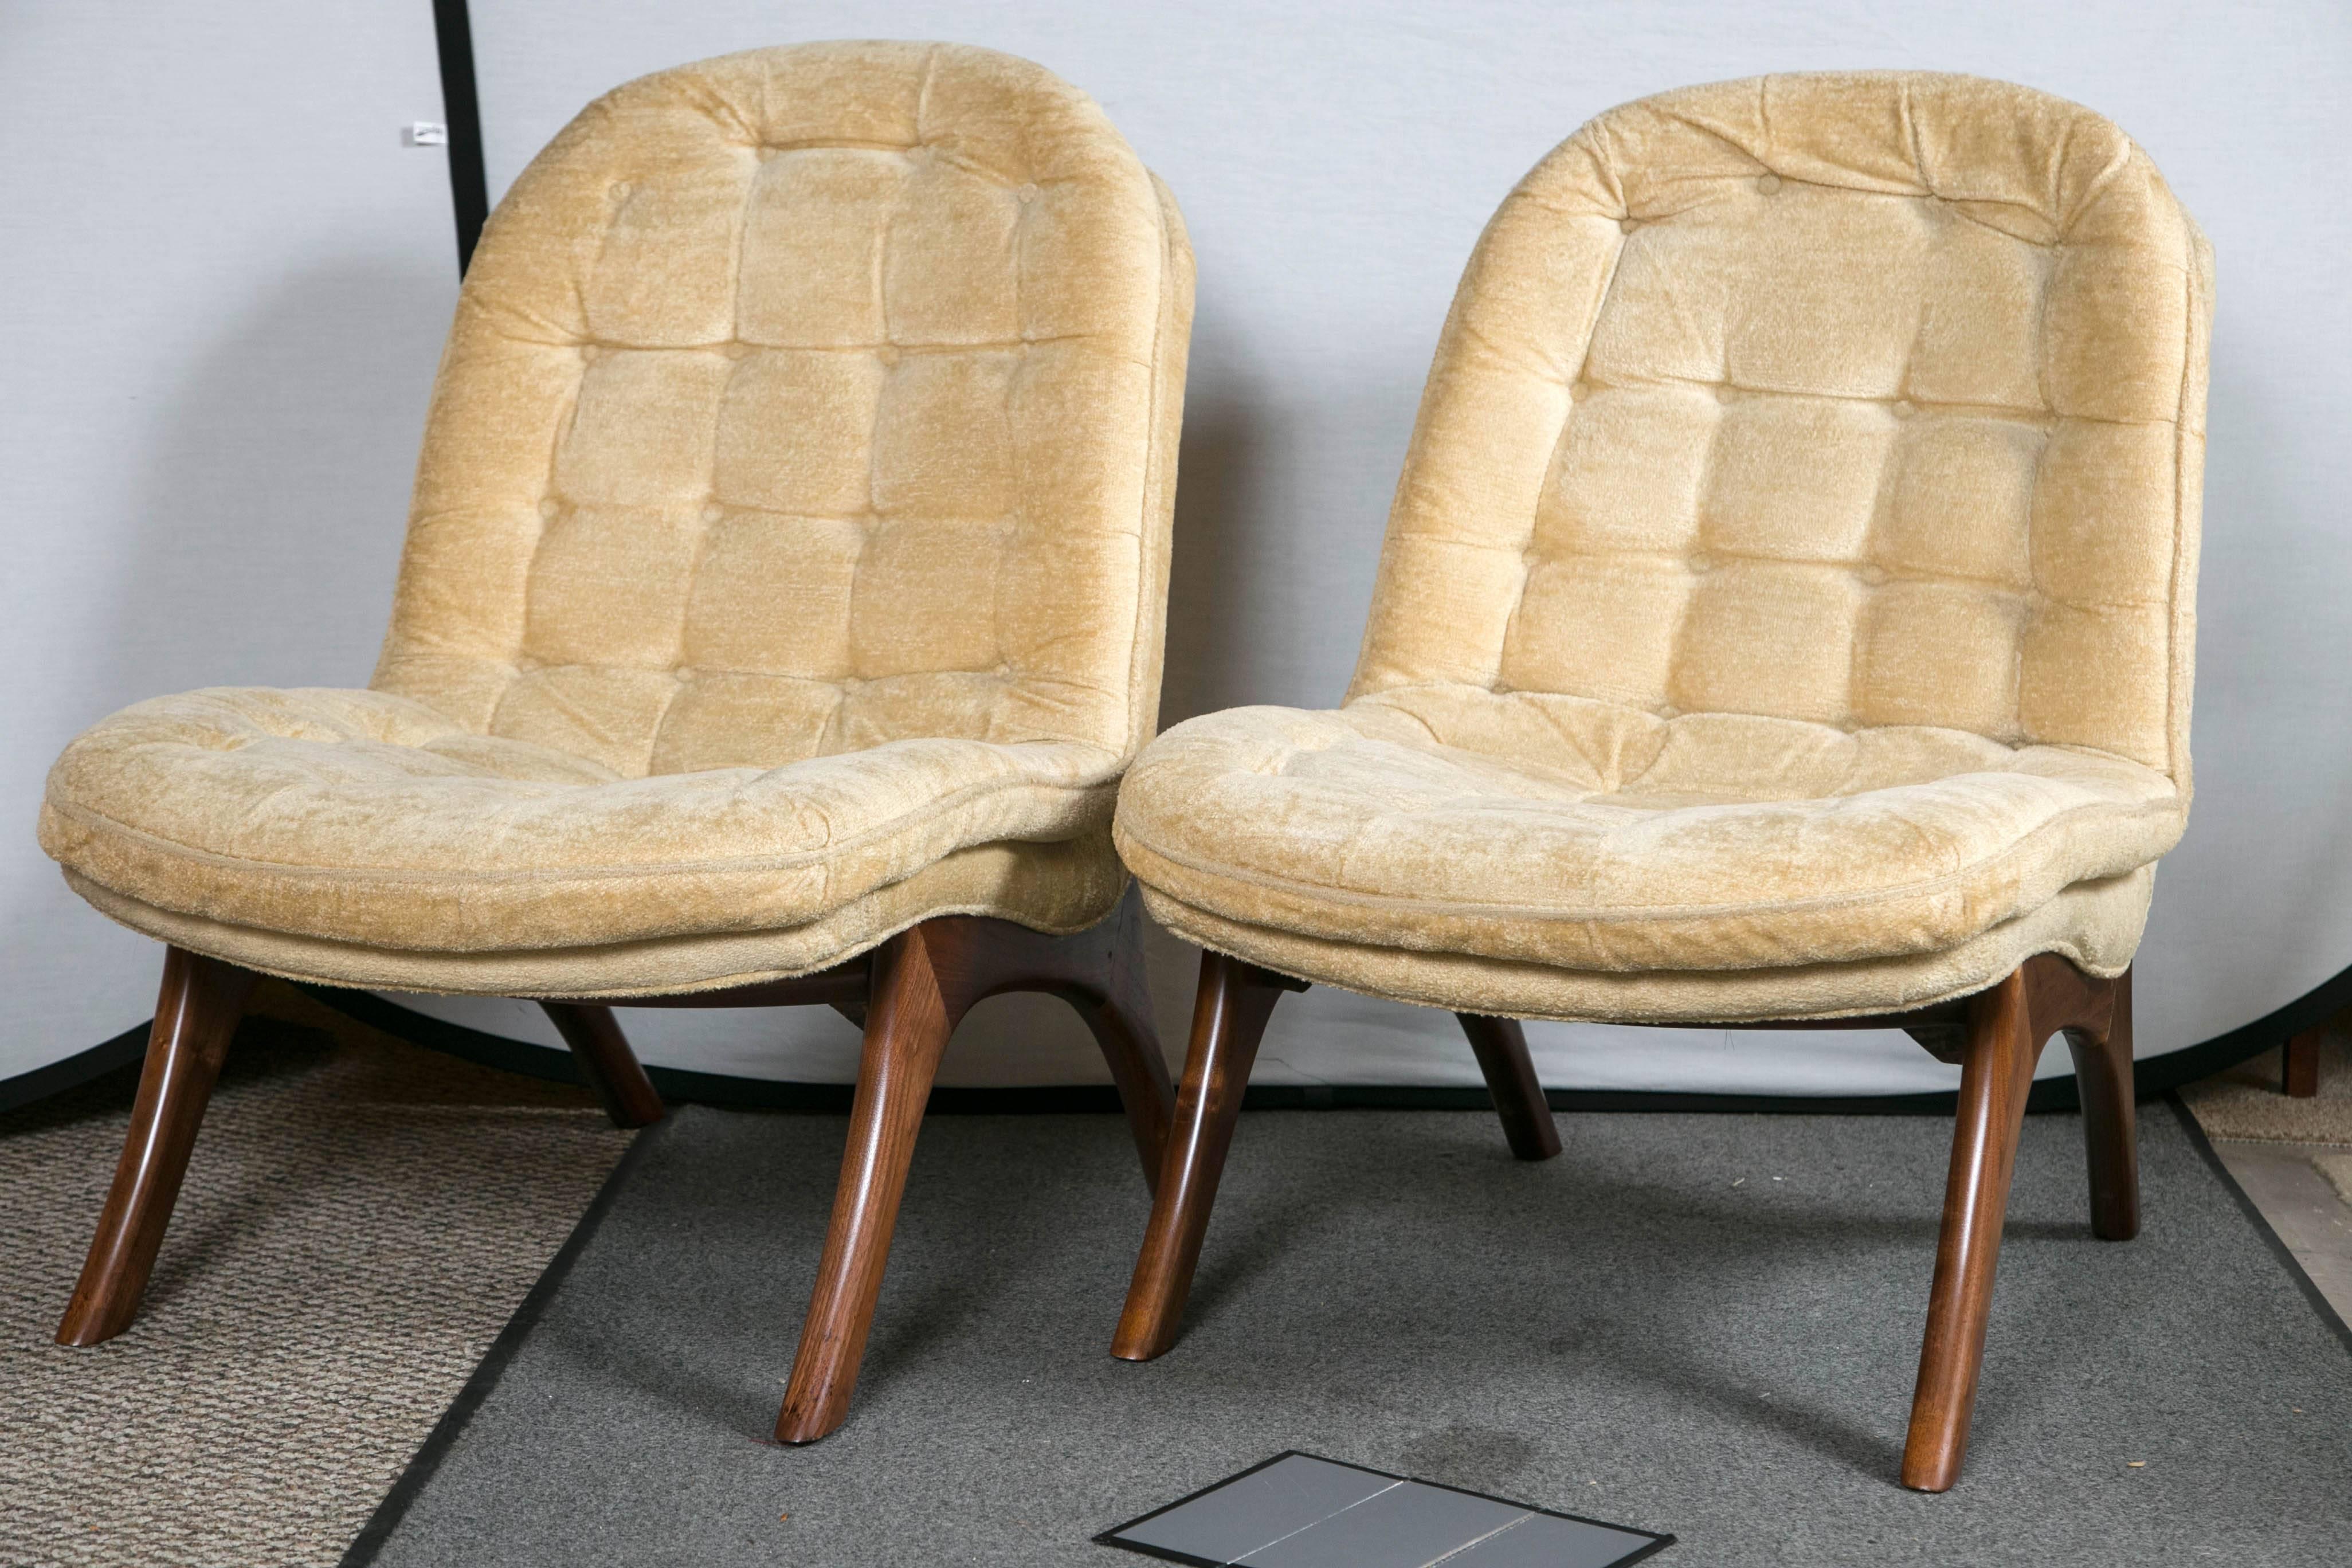 An elegant pair of tufted slipper chairs. Very comfortable, with a low profile. Original upholstery in very good condition but could be updated.